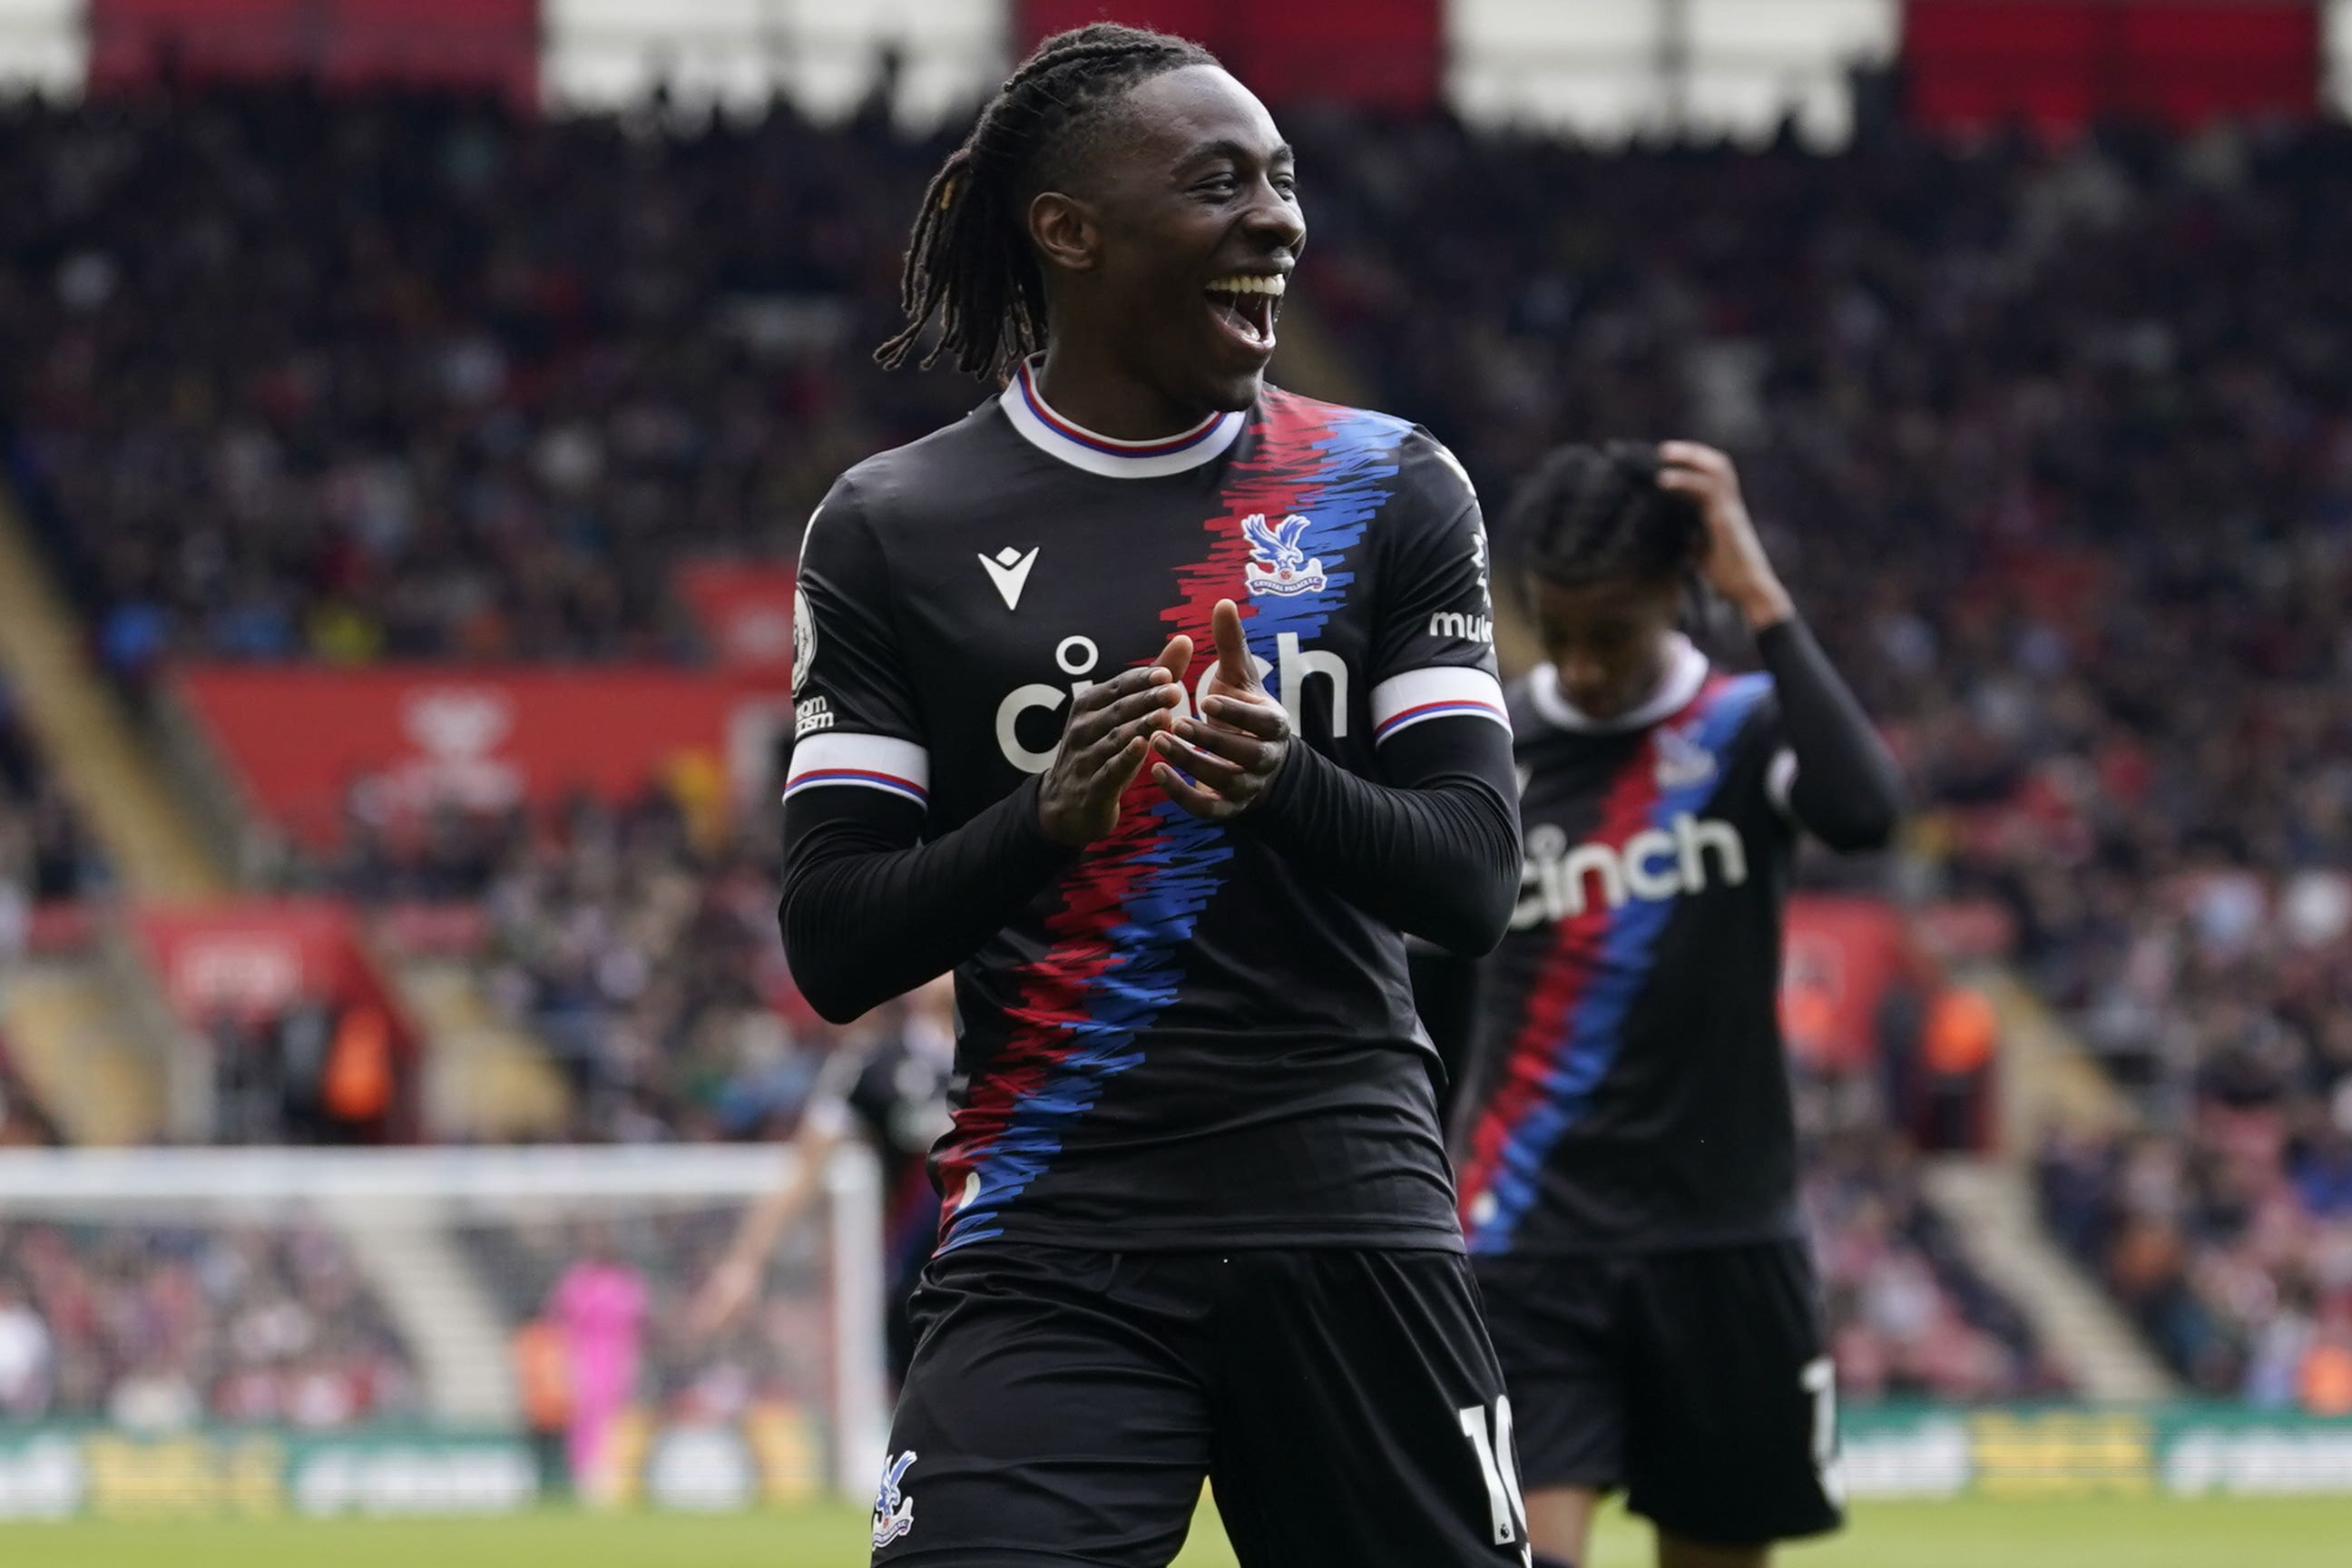  Eberechi Eze of Crystal Palace celebrates scoring his team's first goal during the Premier League match between Southampton and Crystal Palace at St Mary's Stadium on April 9, 2023.